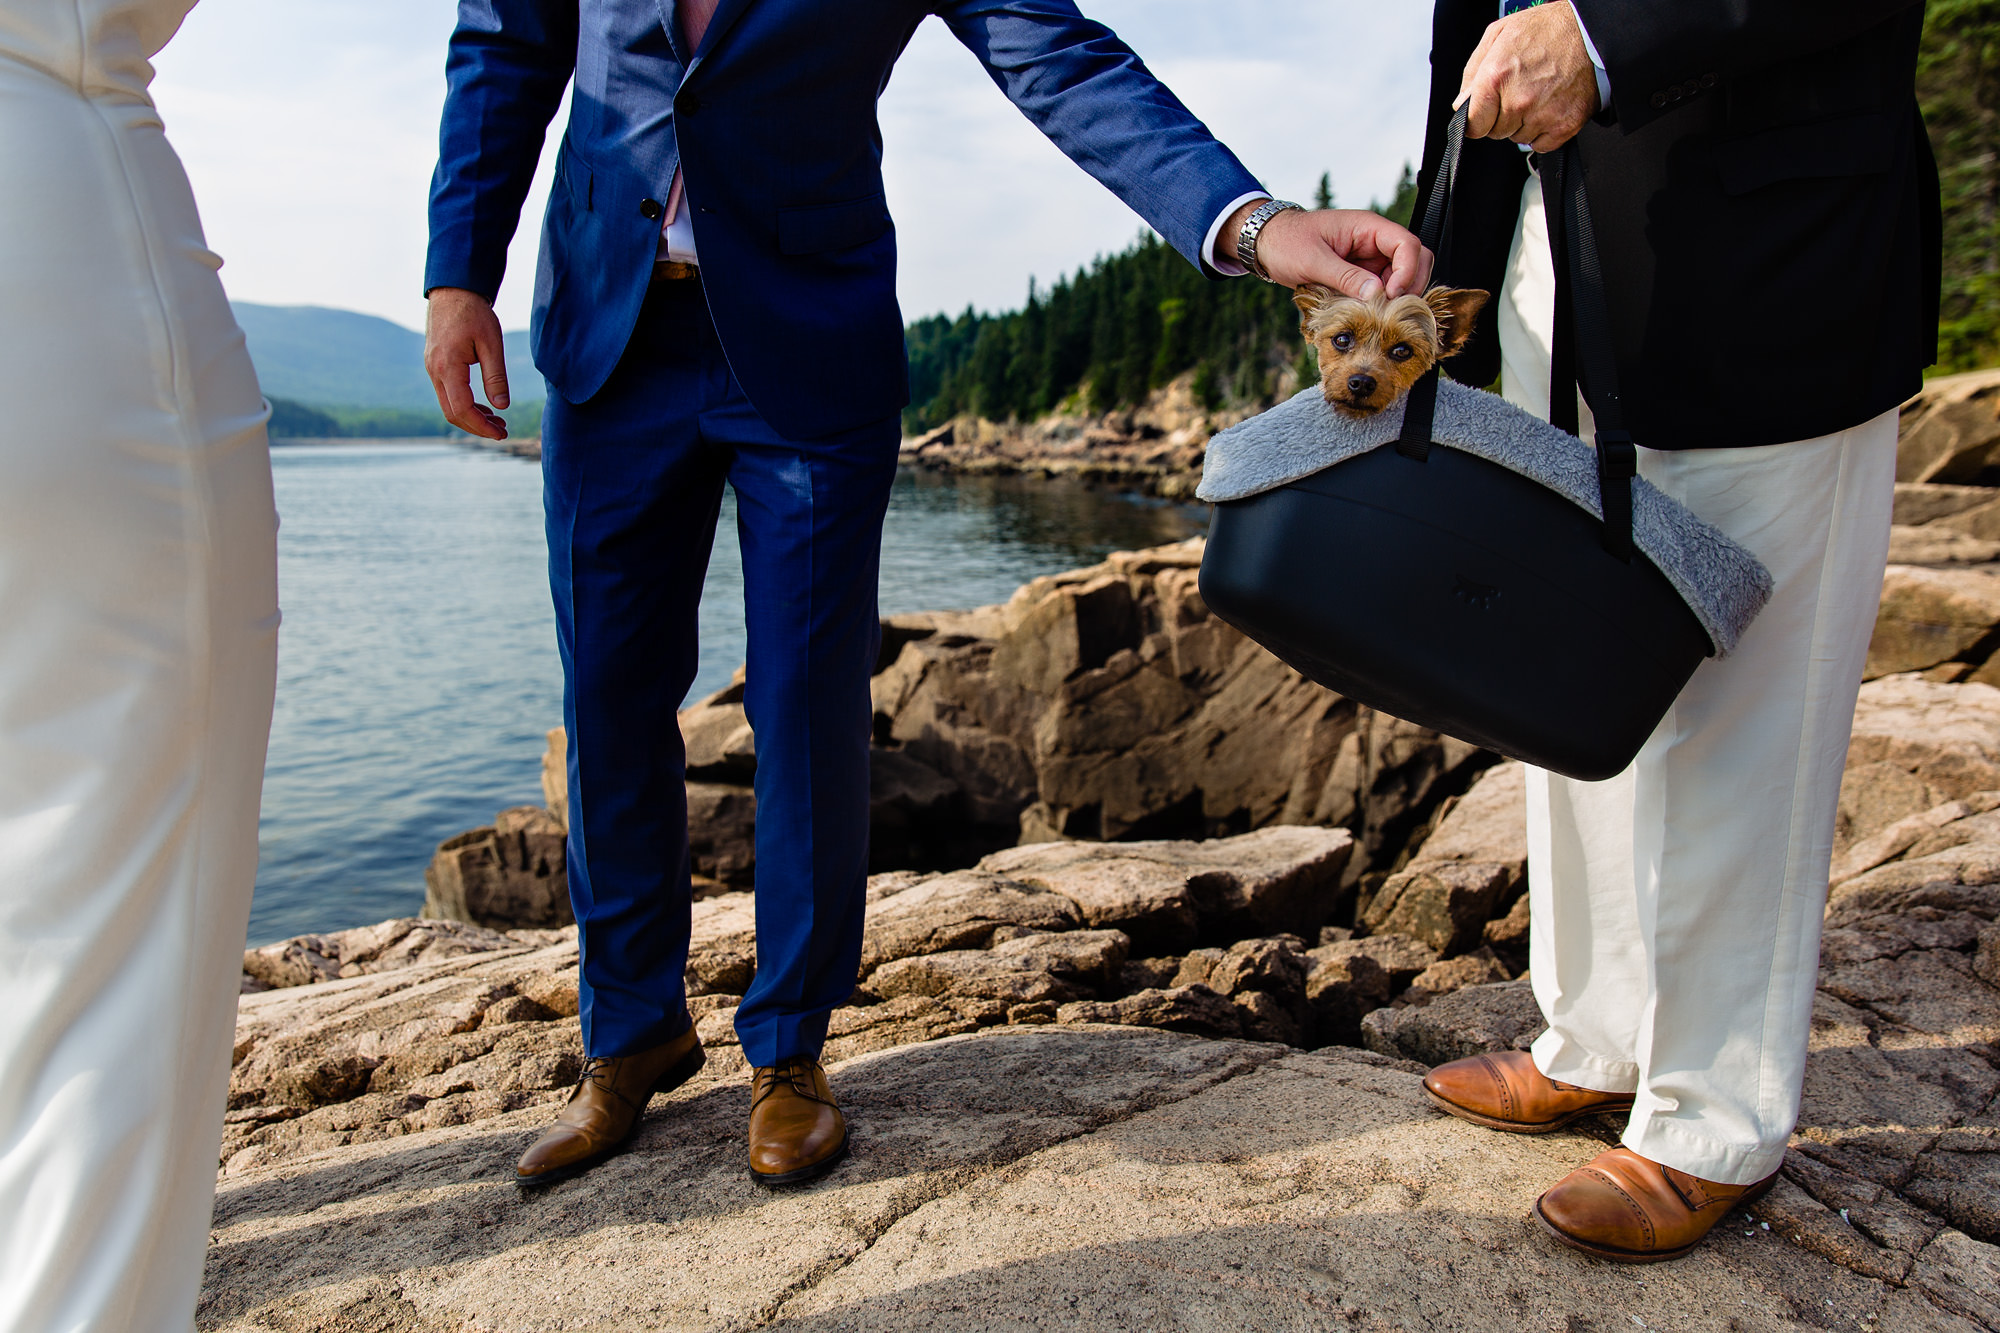 An elopement ceremony at Otter Point in Acadia National Park